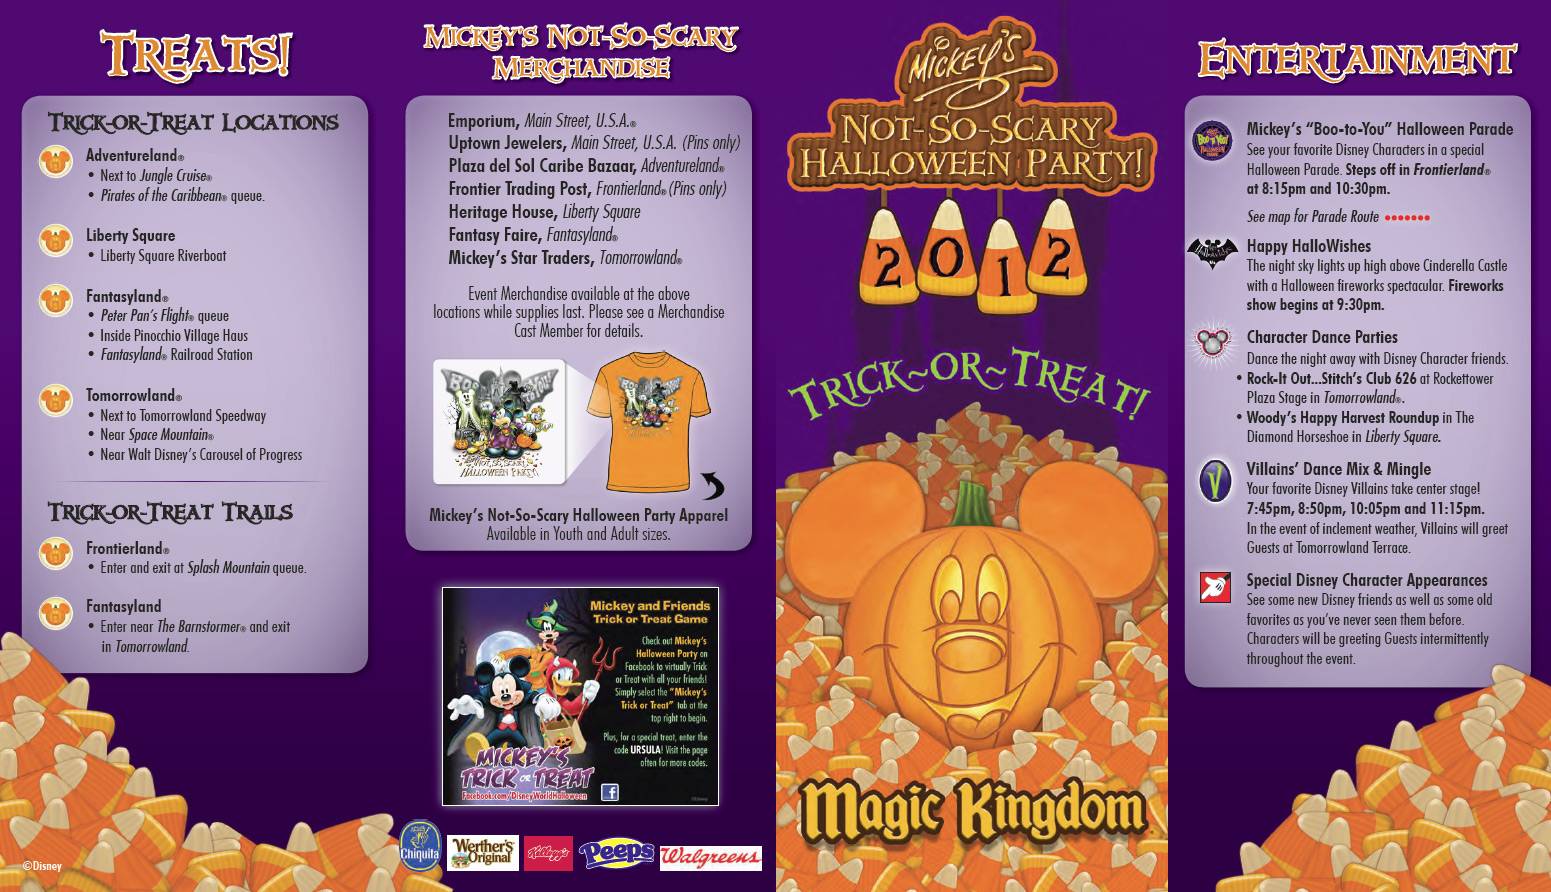 Mickey's Not-So-Scary Halloween Party 2012 guide